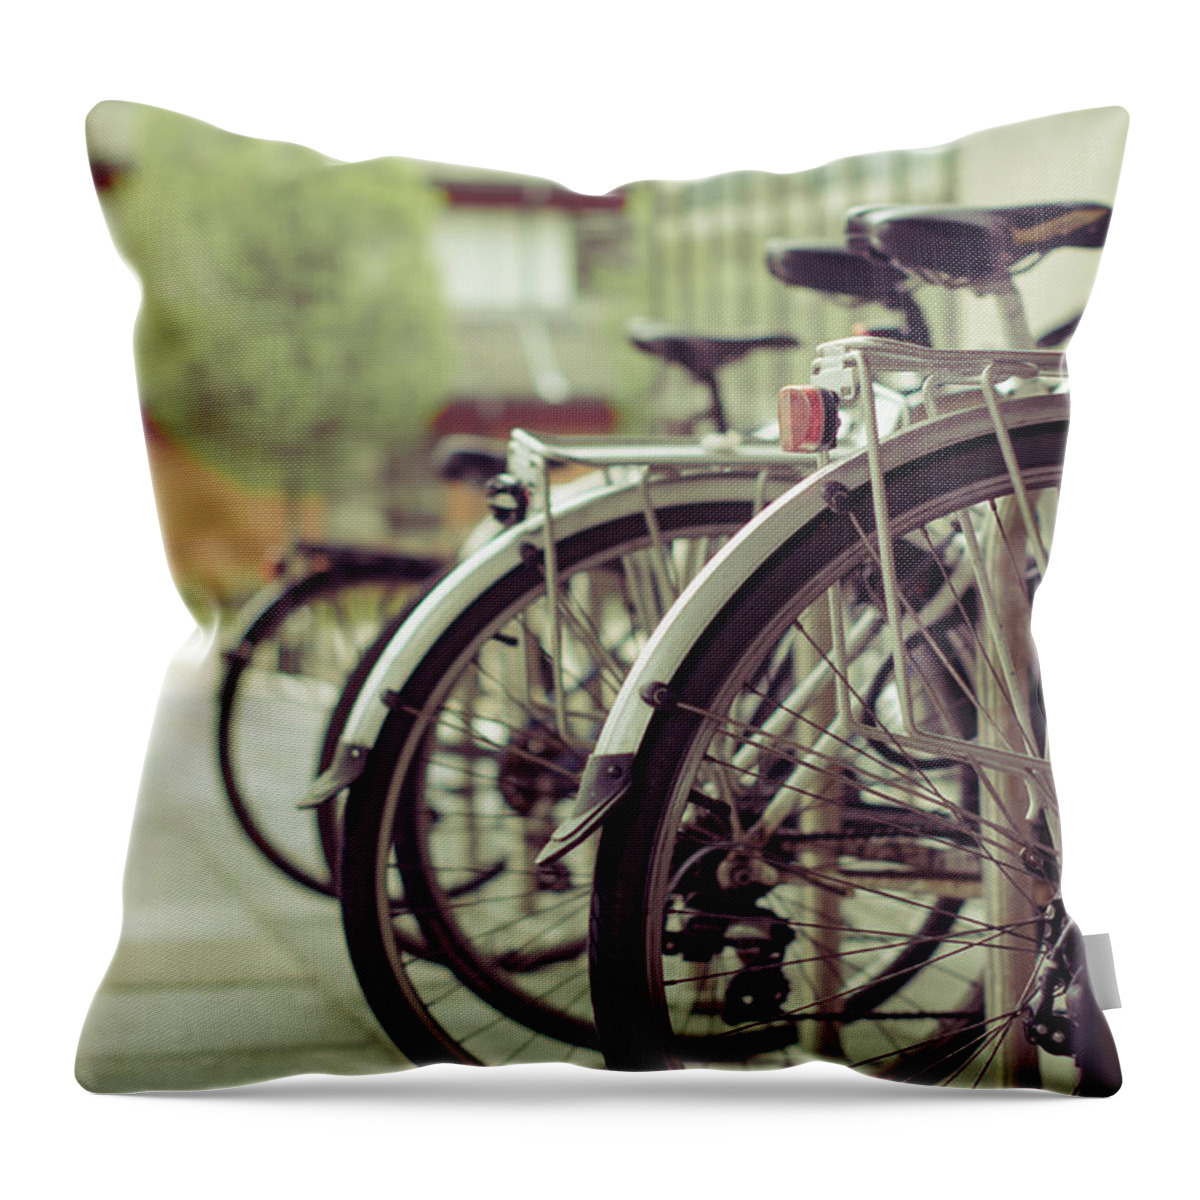 West Yorkshire Throw Pillow featuring the photograph Bikes by Jenna Woodward Photography